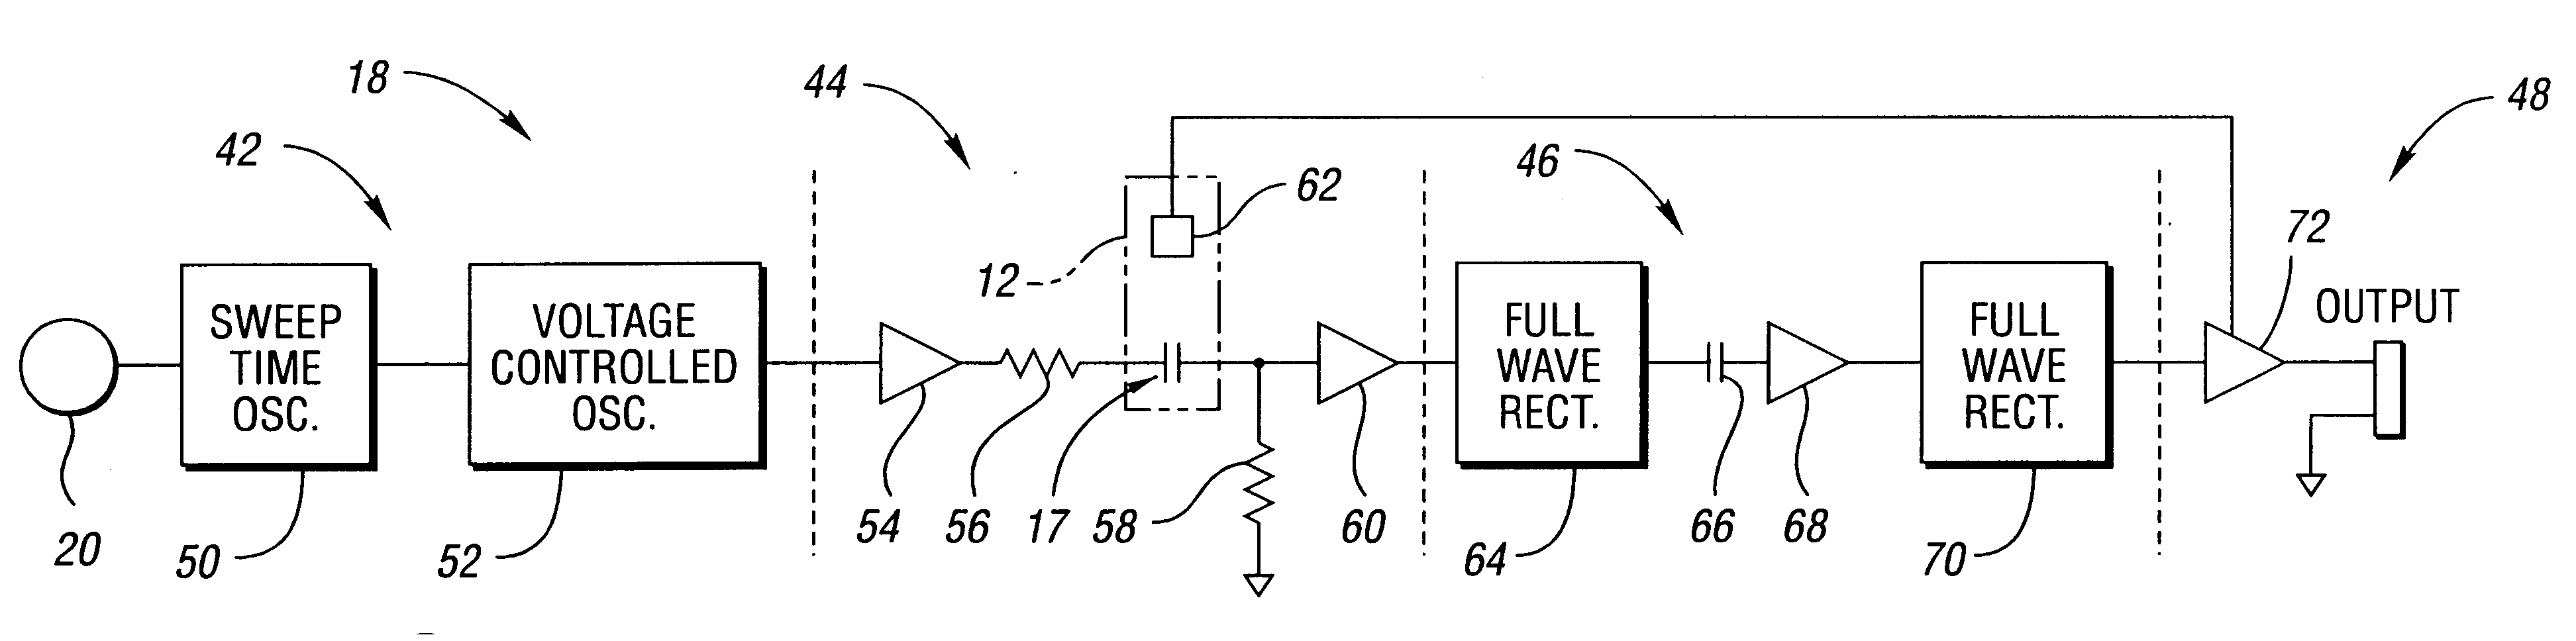 Method and system for determining oil quality